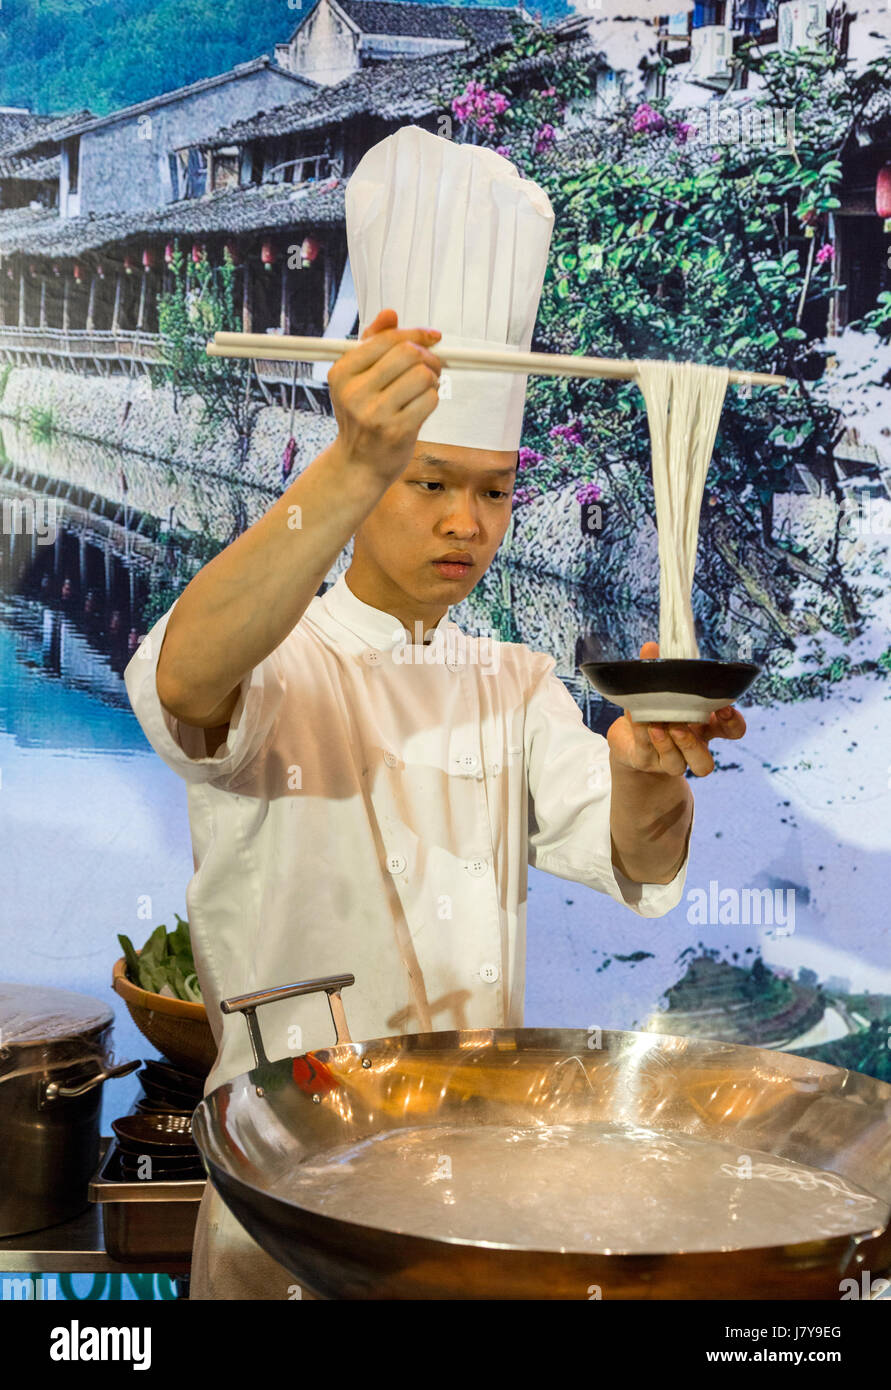 Wenzhou, Zhejiang, China.  Hotel Chef Demonstrating the Cooking and Serving of Noodles. Stock Photo